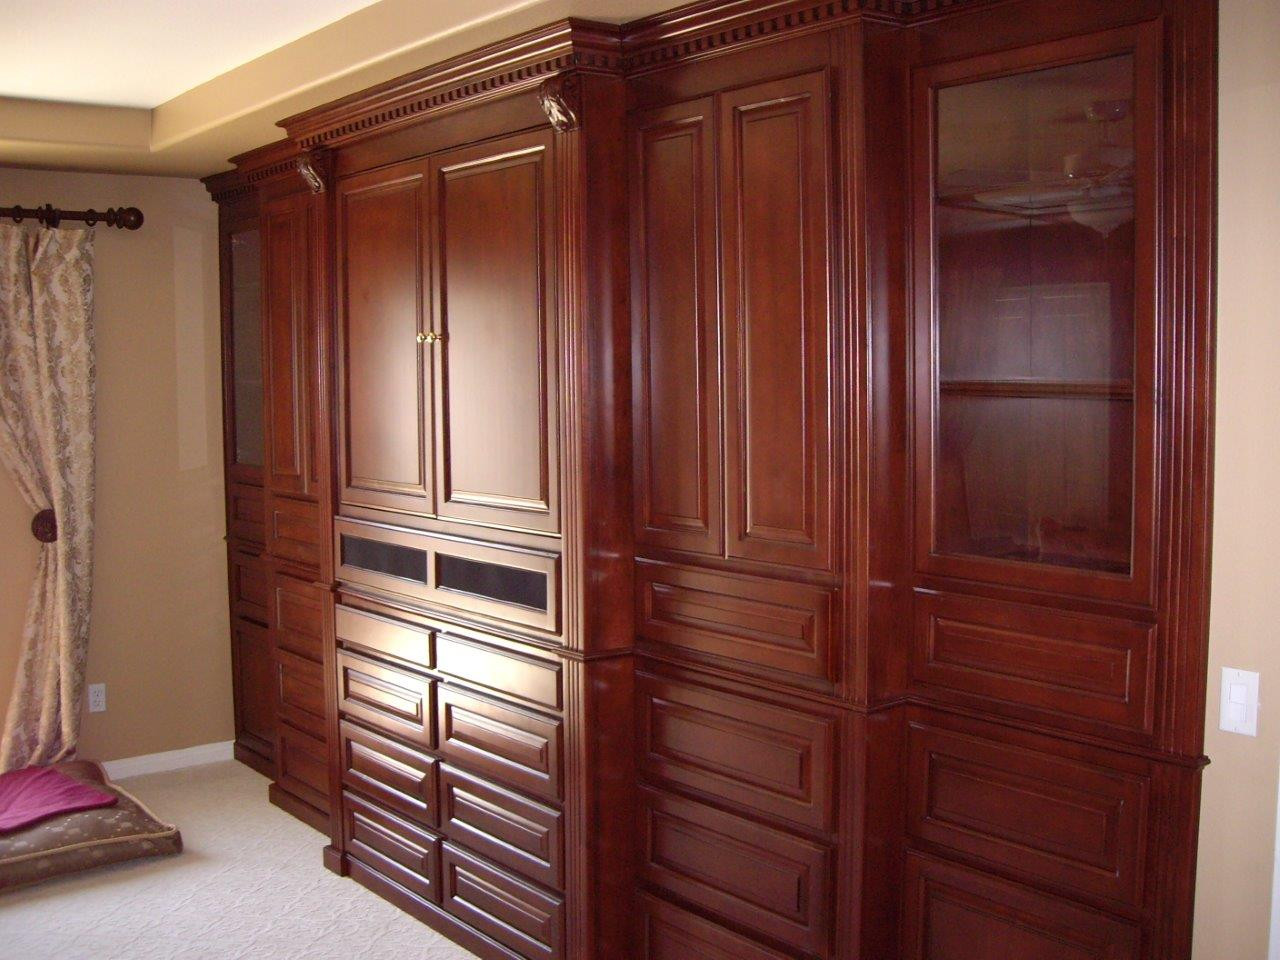 Built In Bedroom Cabinetry
 Murphy Beds and Bedroom Cabinets Woodwork Creations